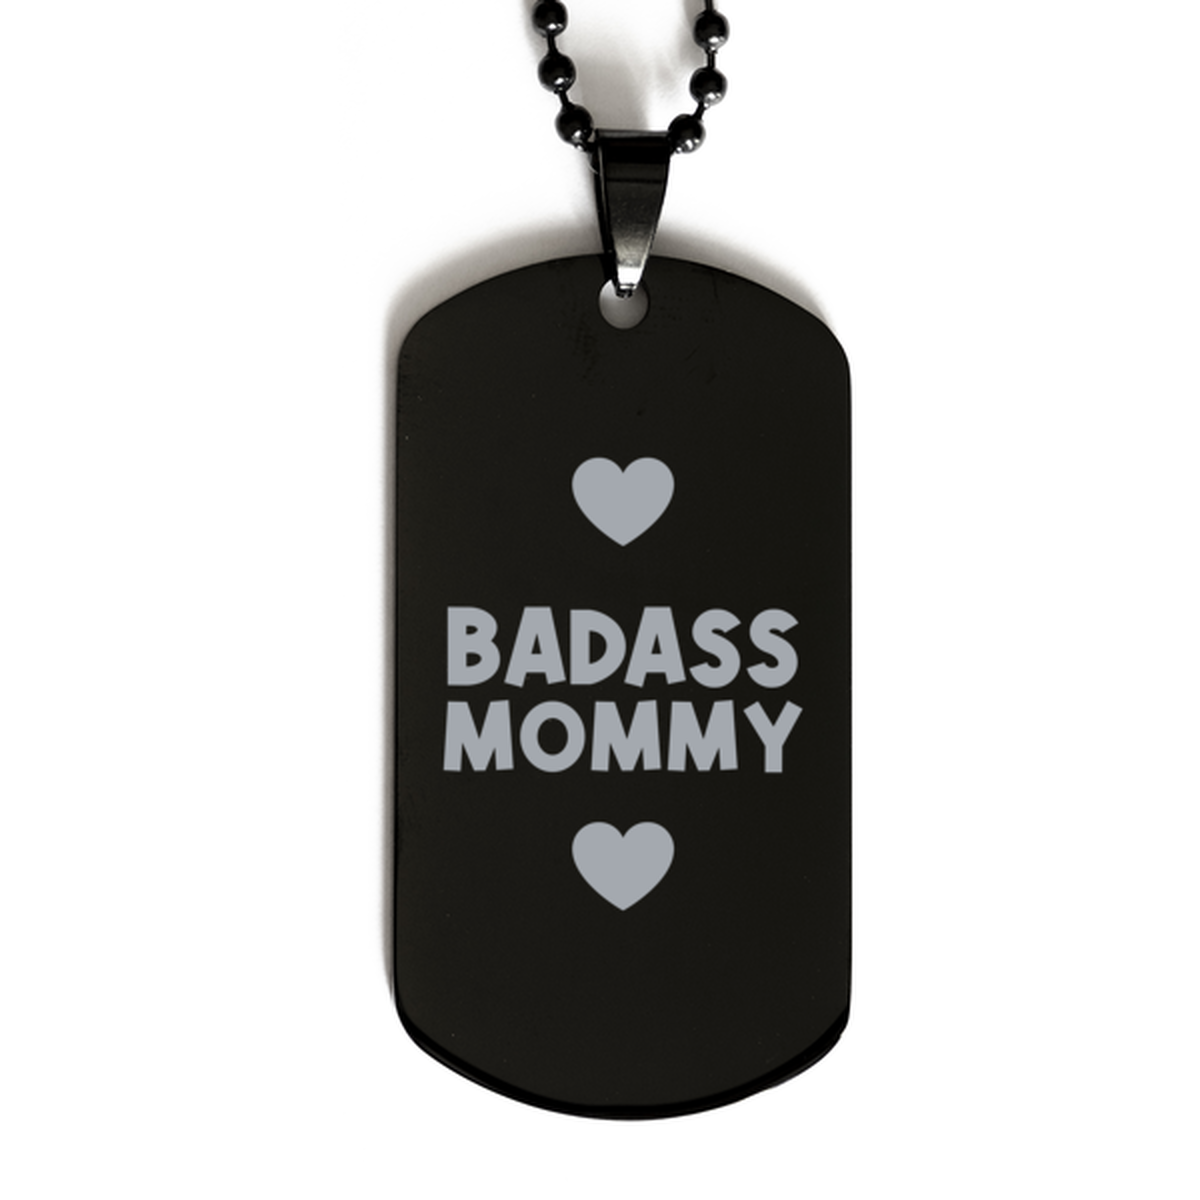 Mommy Black Dog Tag, Badass Mommy, Funny Family Gifts  Necklace For Mommy From Son Daughter